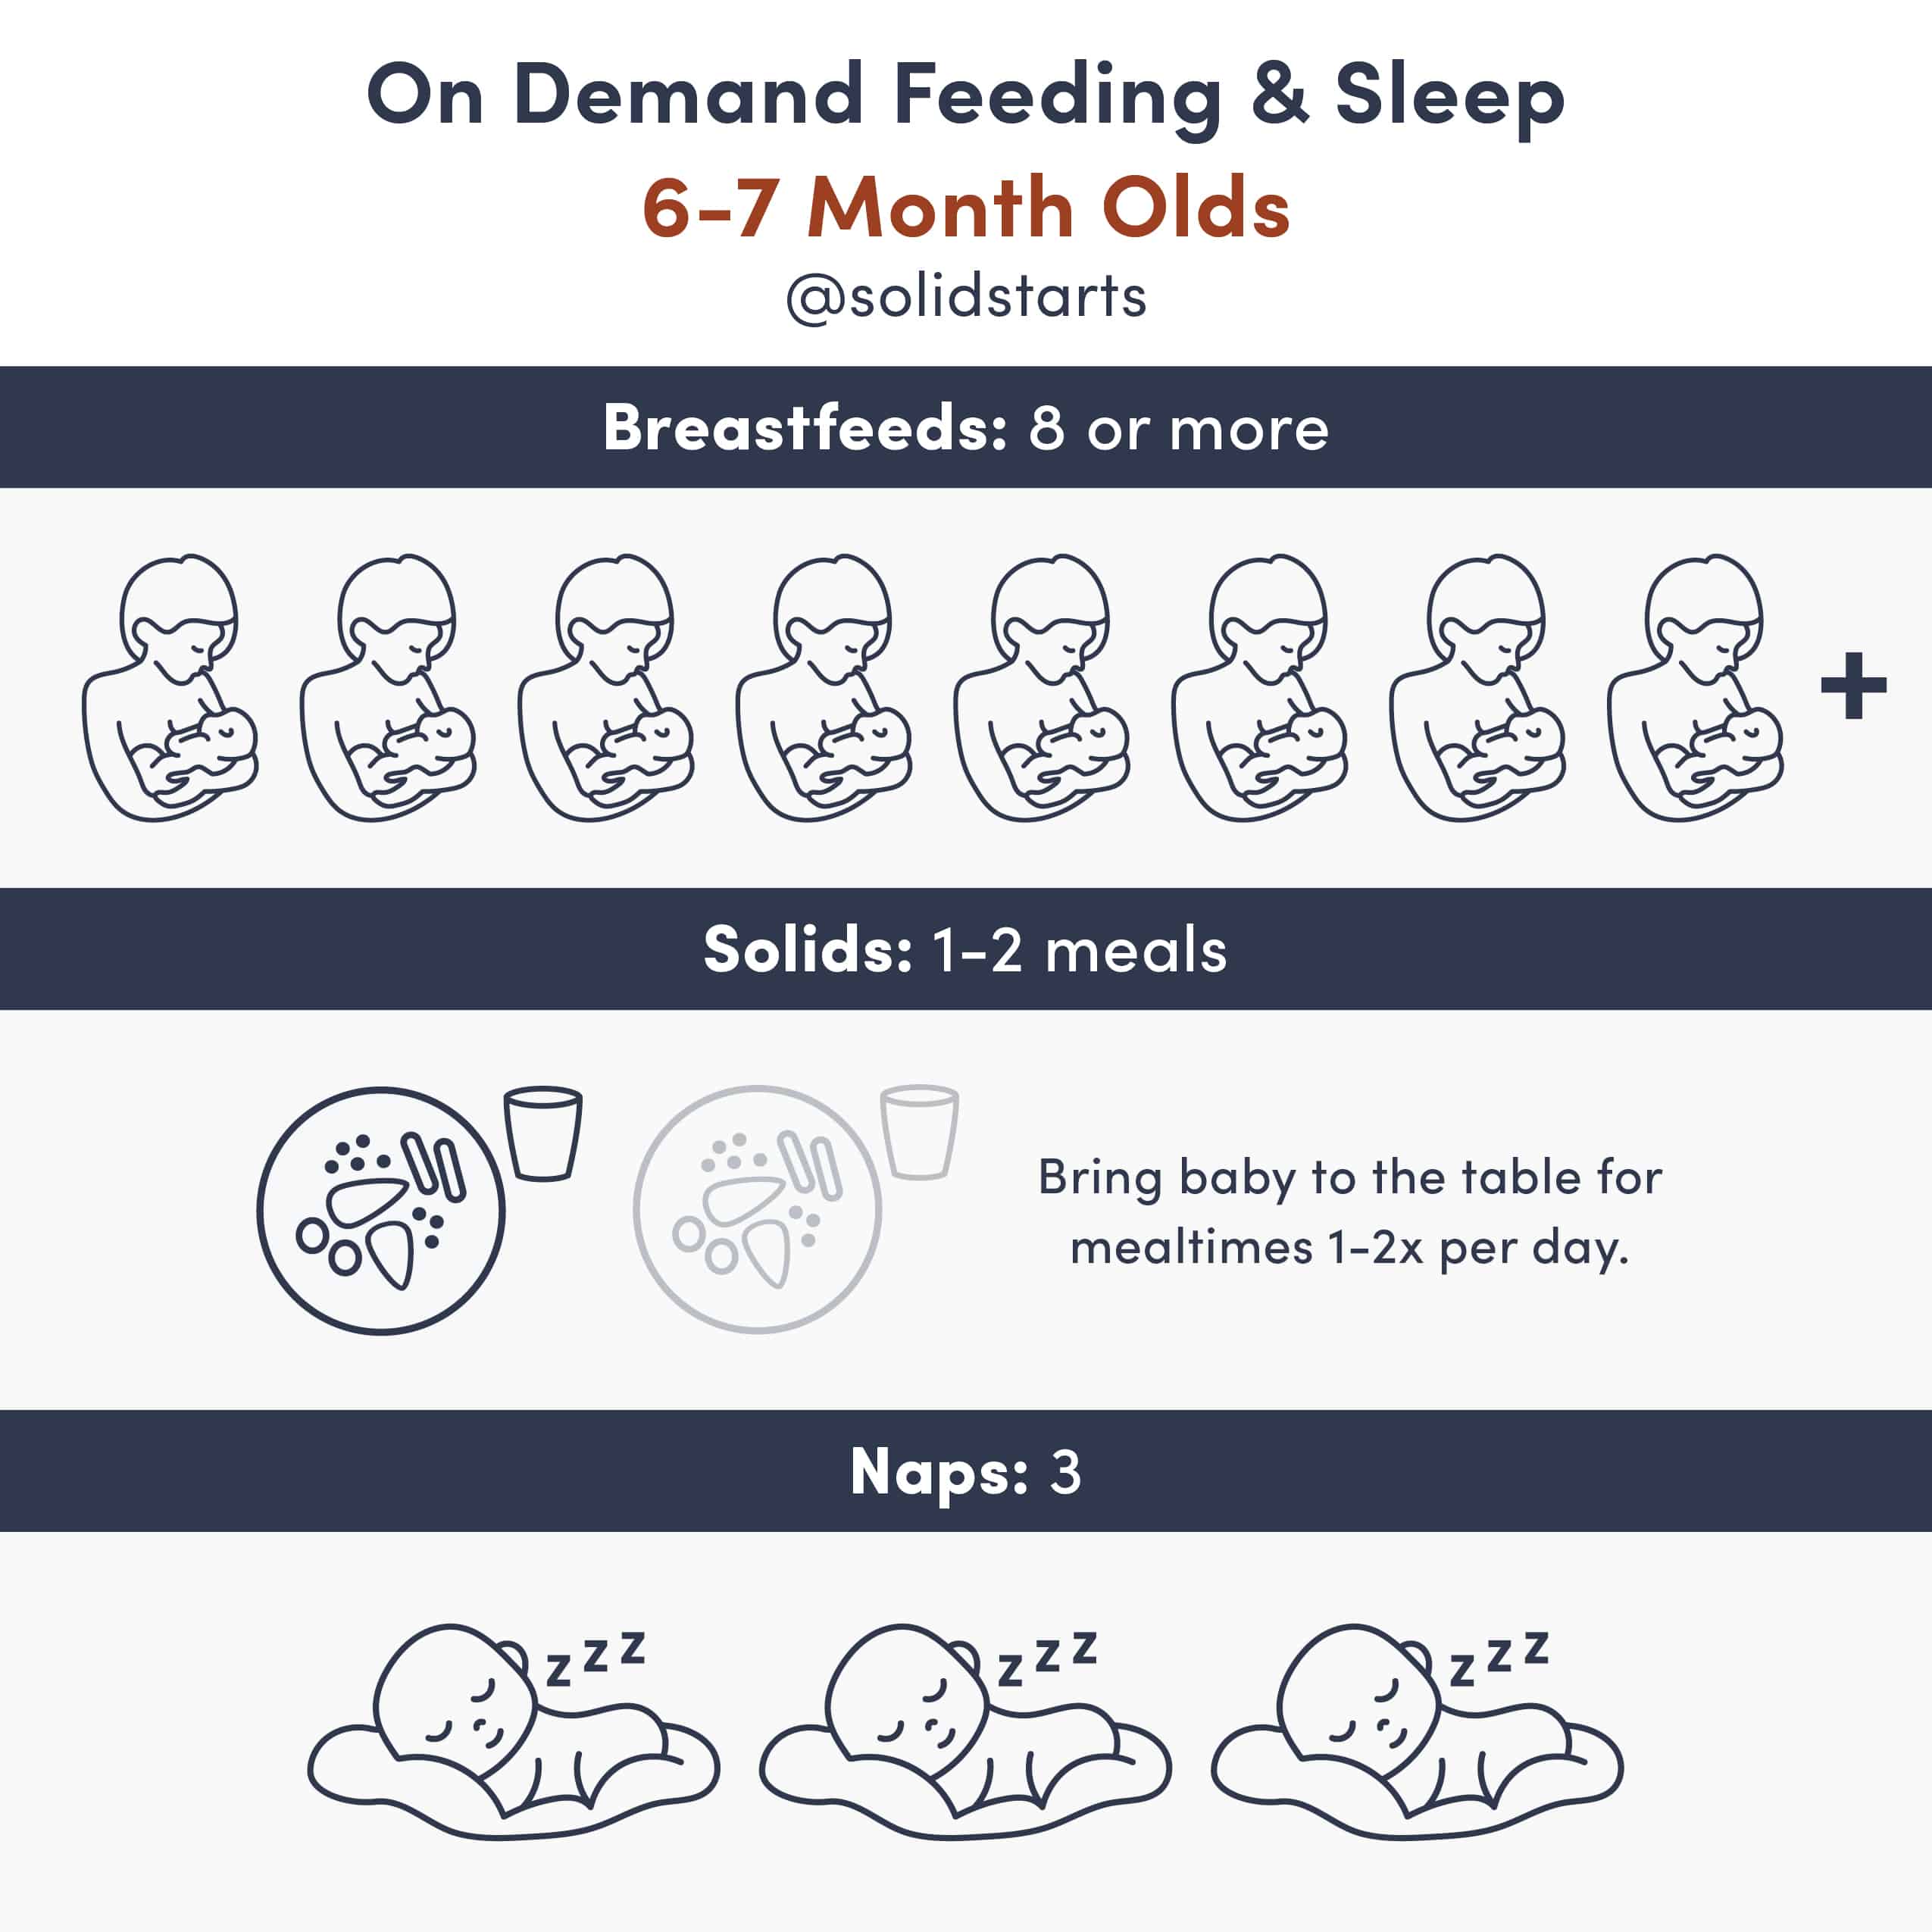 Give breast milk or solids first?